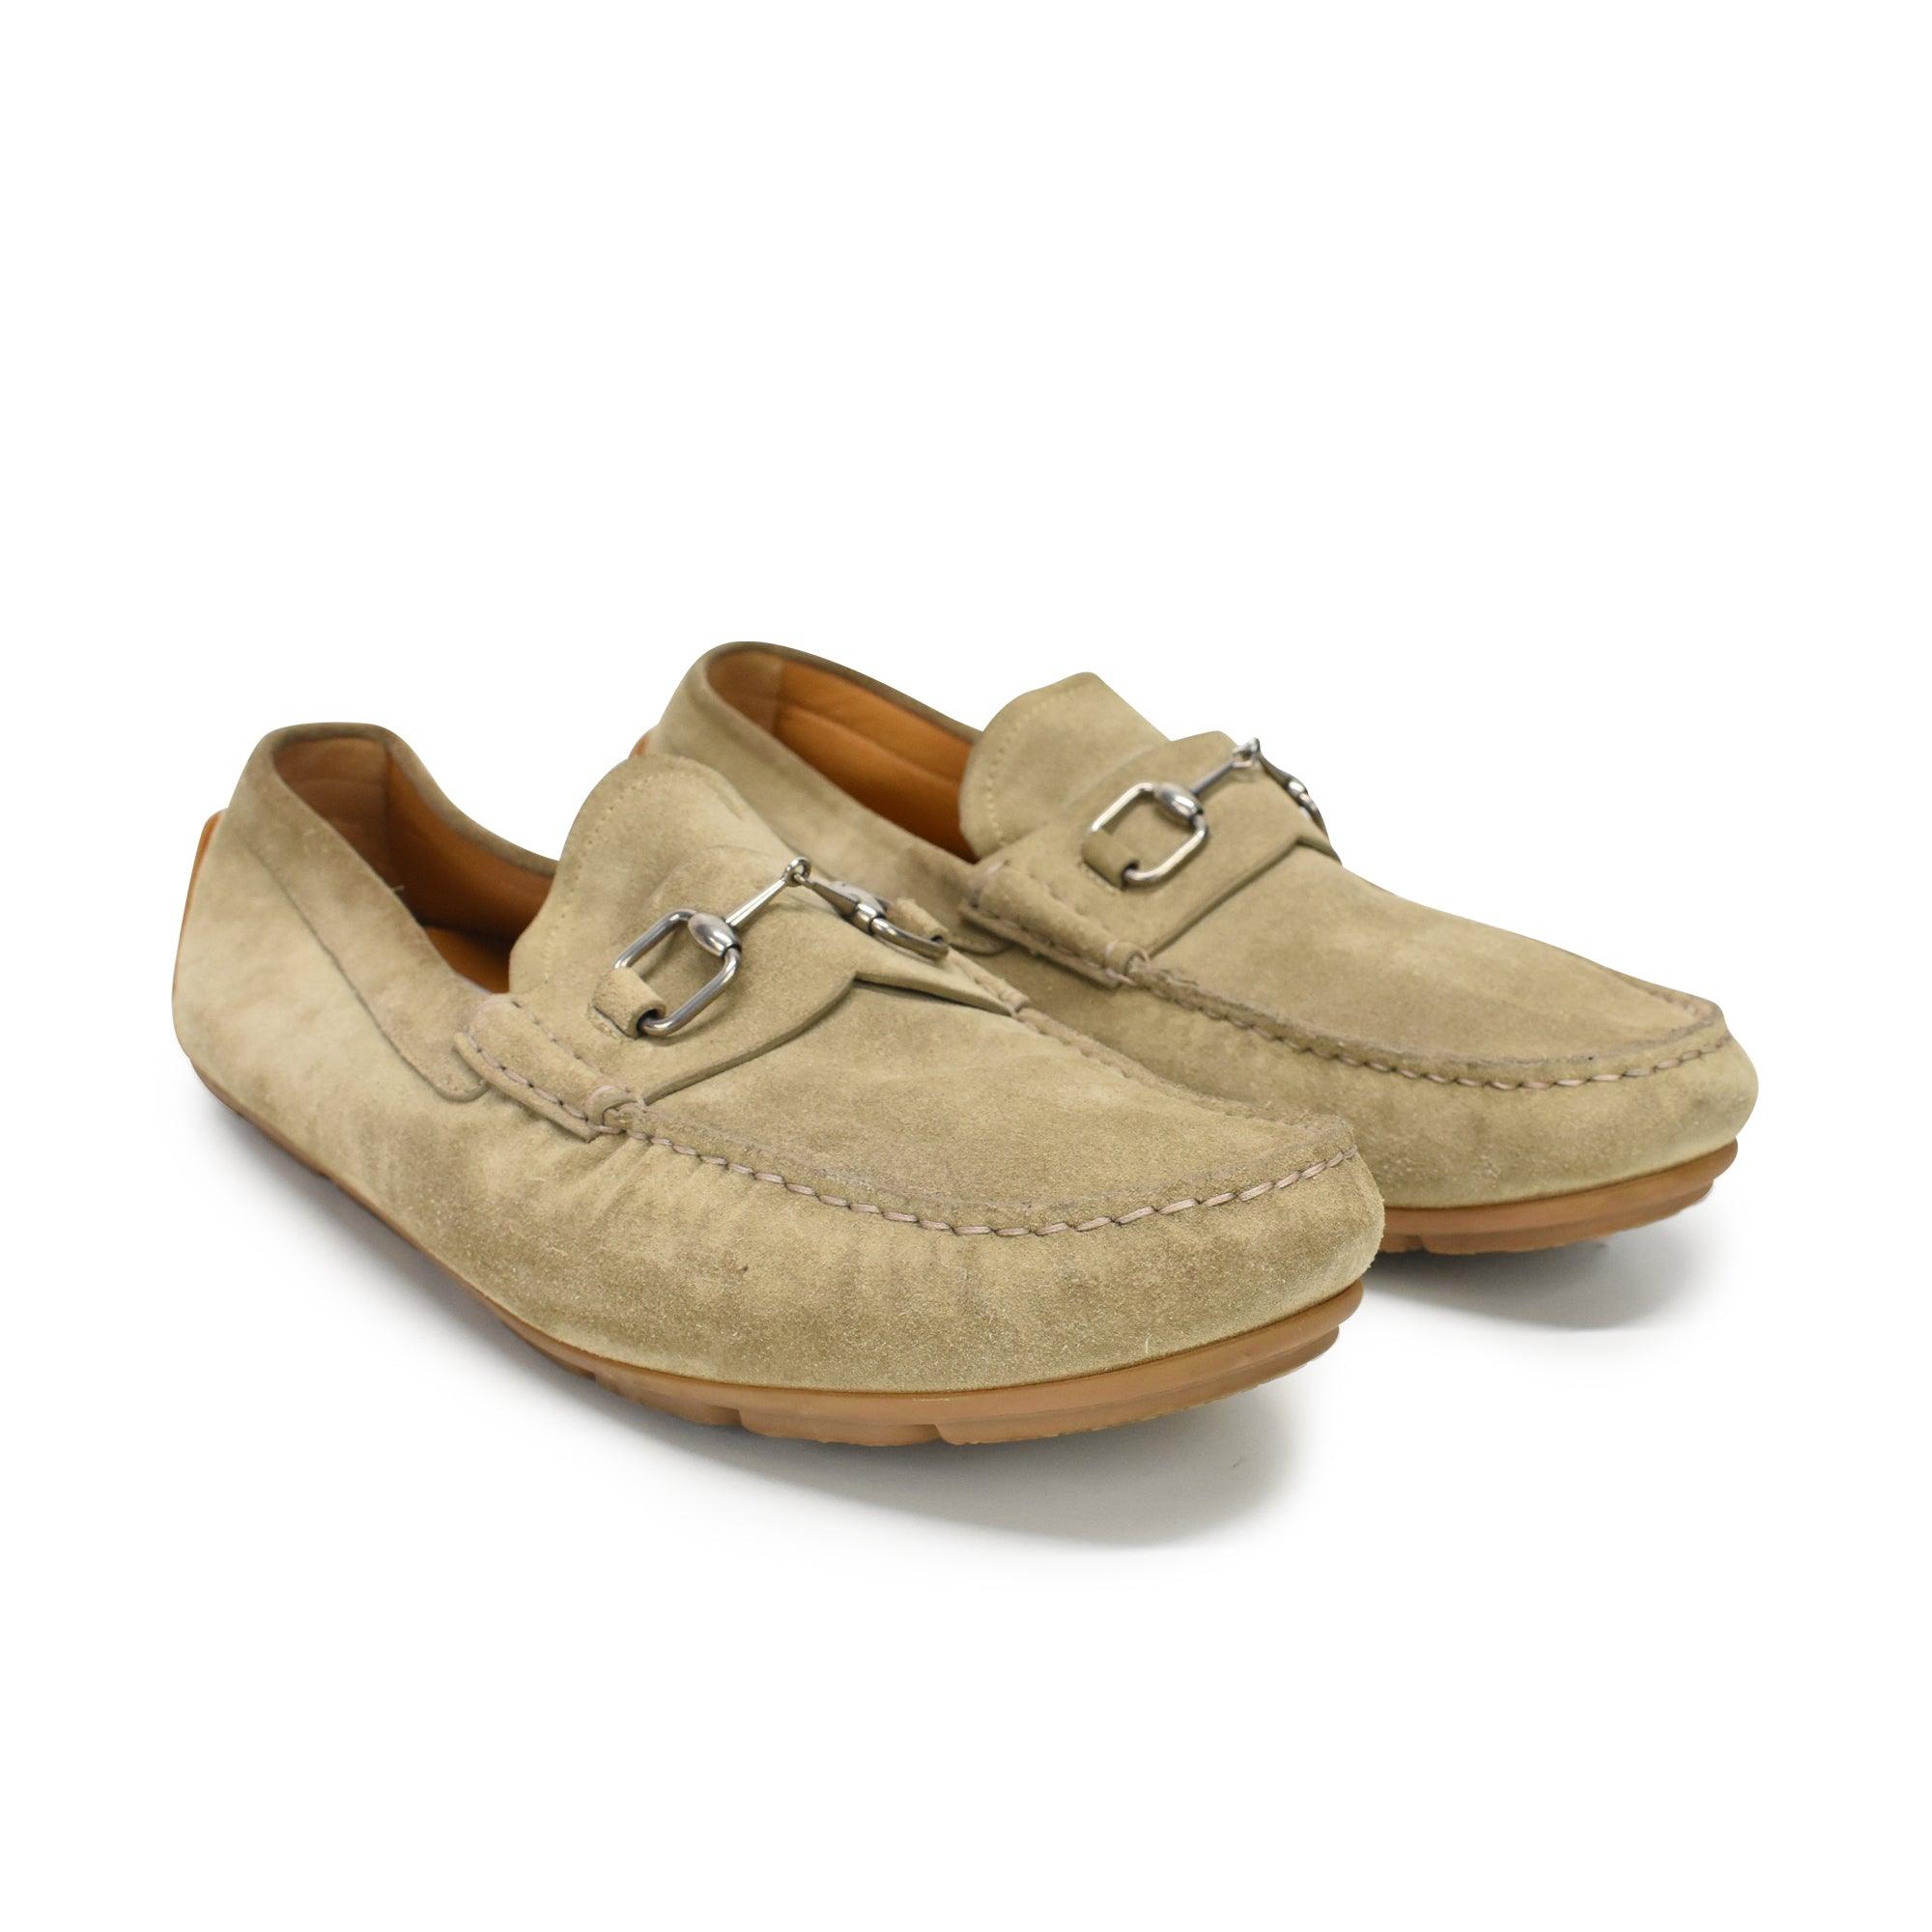 Gucci Loafers - Men's 11 - Fashionably Yours